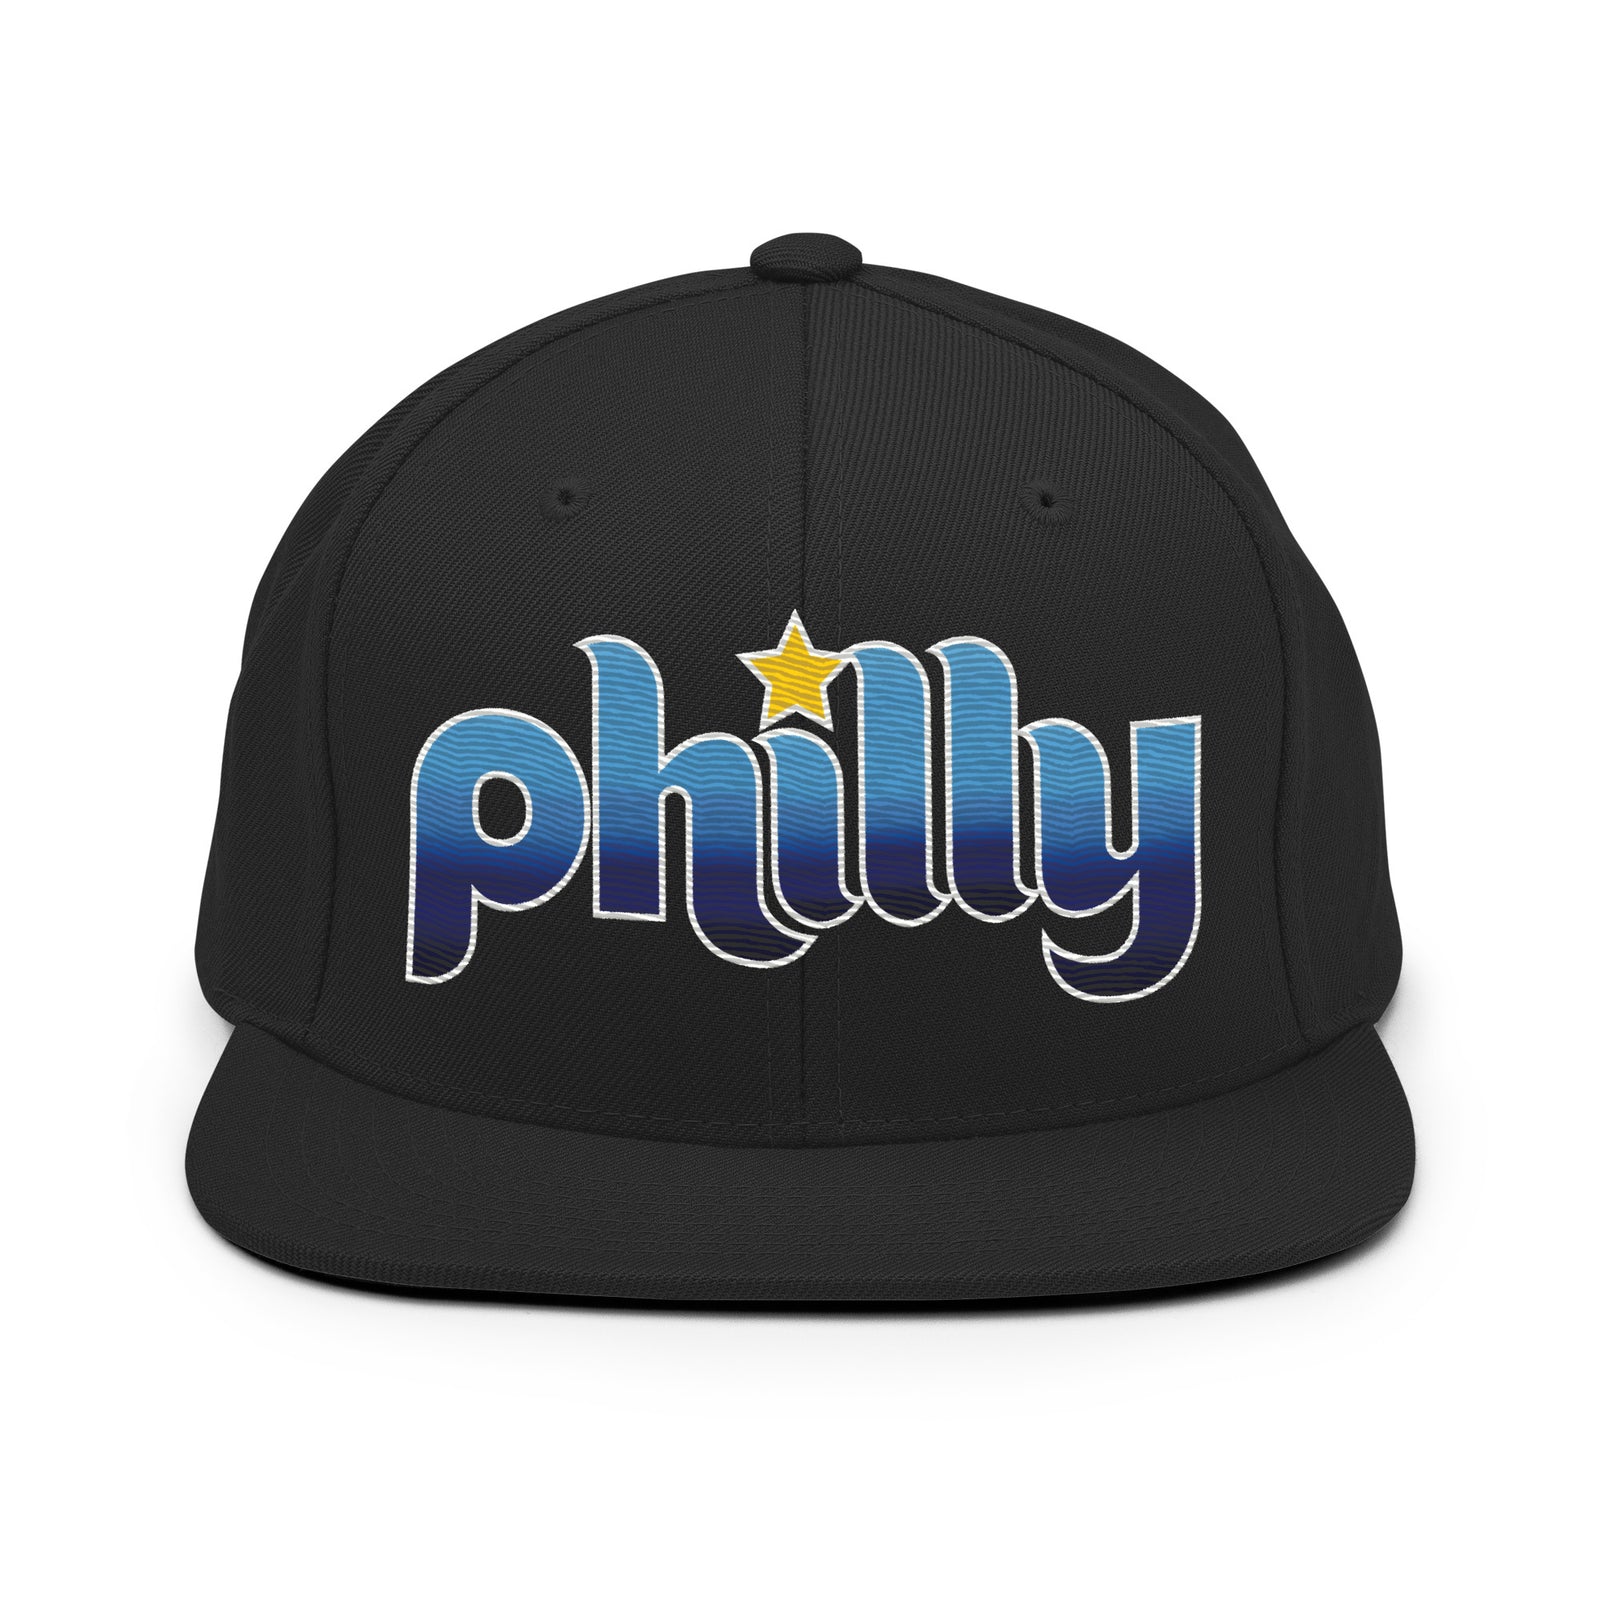 "Philly Connect" Snapback Hat